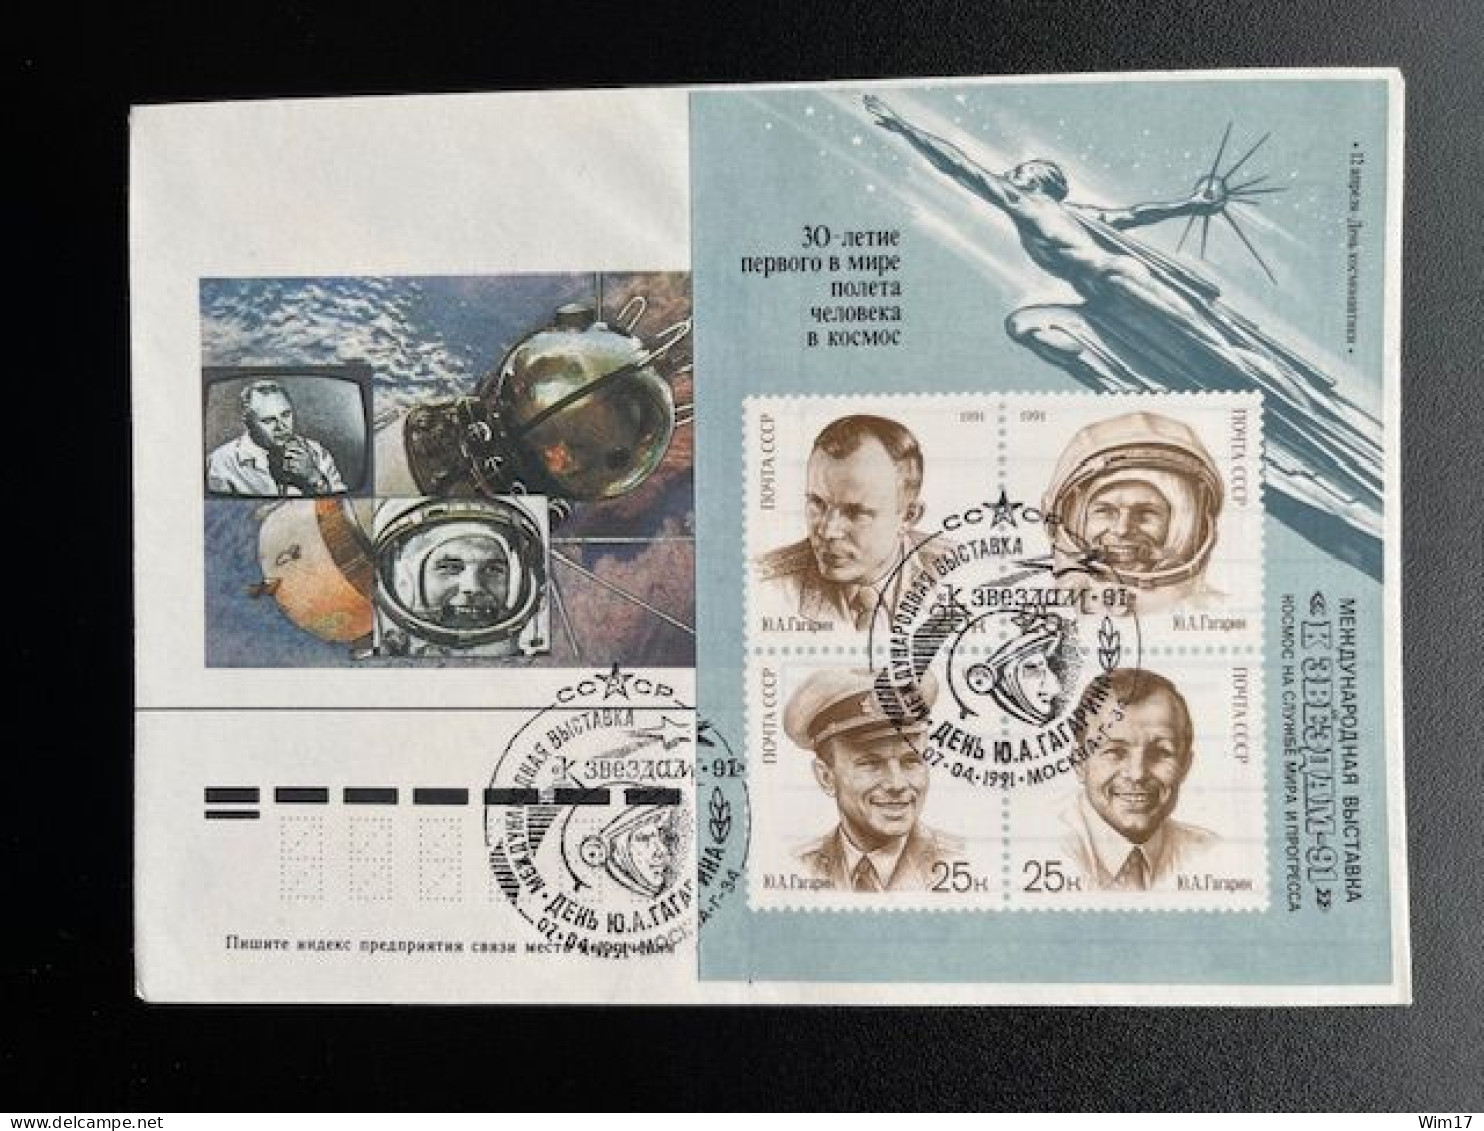 RUSSIA USSR 1991 COVER 30 YEAR ANNIVERSERY FIRST MANNED SPACE FLIGHT SOVJET UNIE CCCP SOVIET UNION SPACE - Covers & Documents